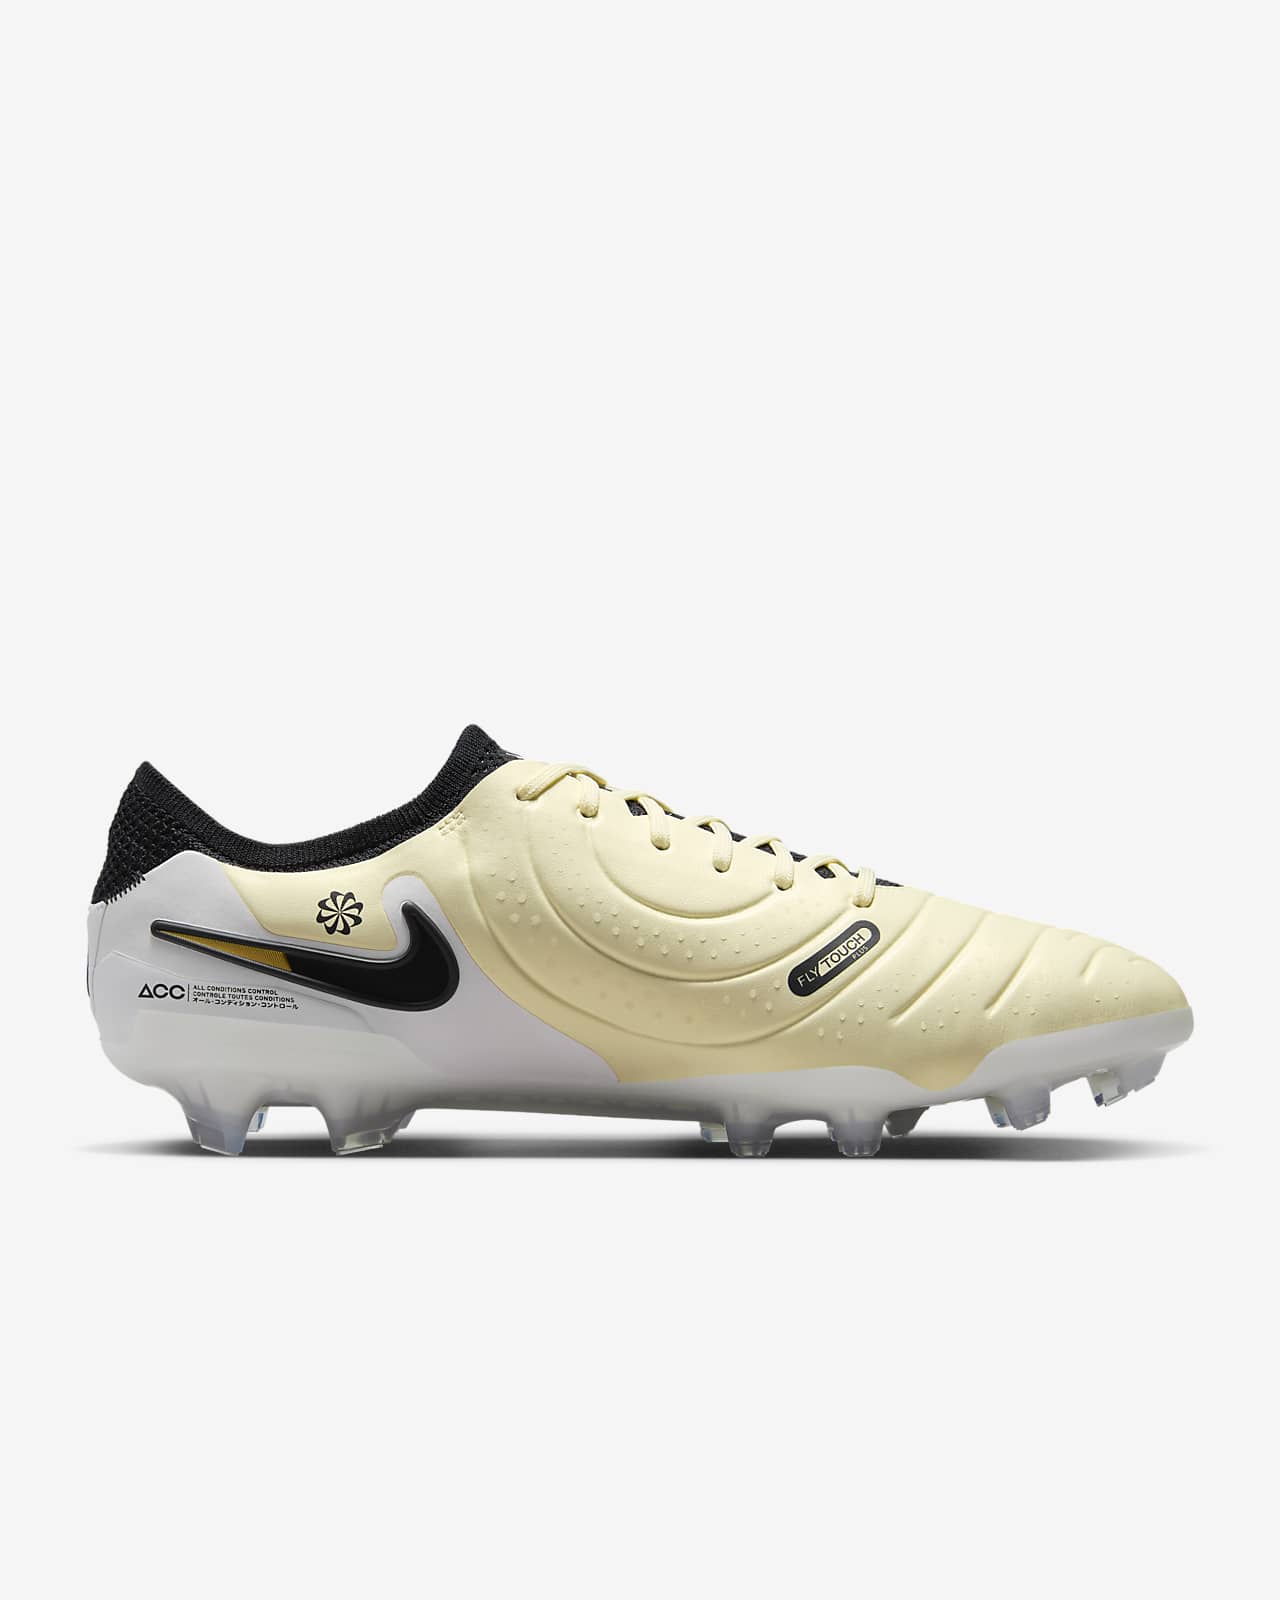 Nike Tiempo Legend 10 Elite Firm-Ground Low-Top Soccer Cleats. Nike.com